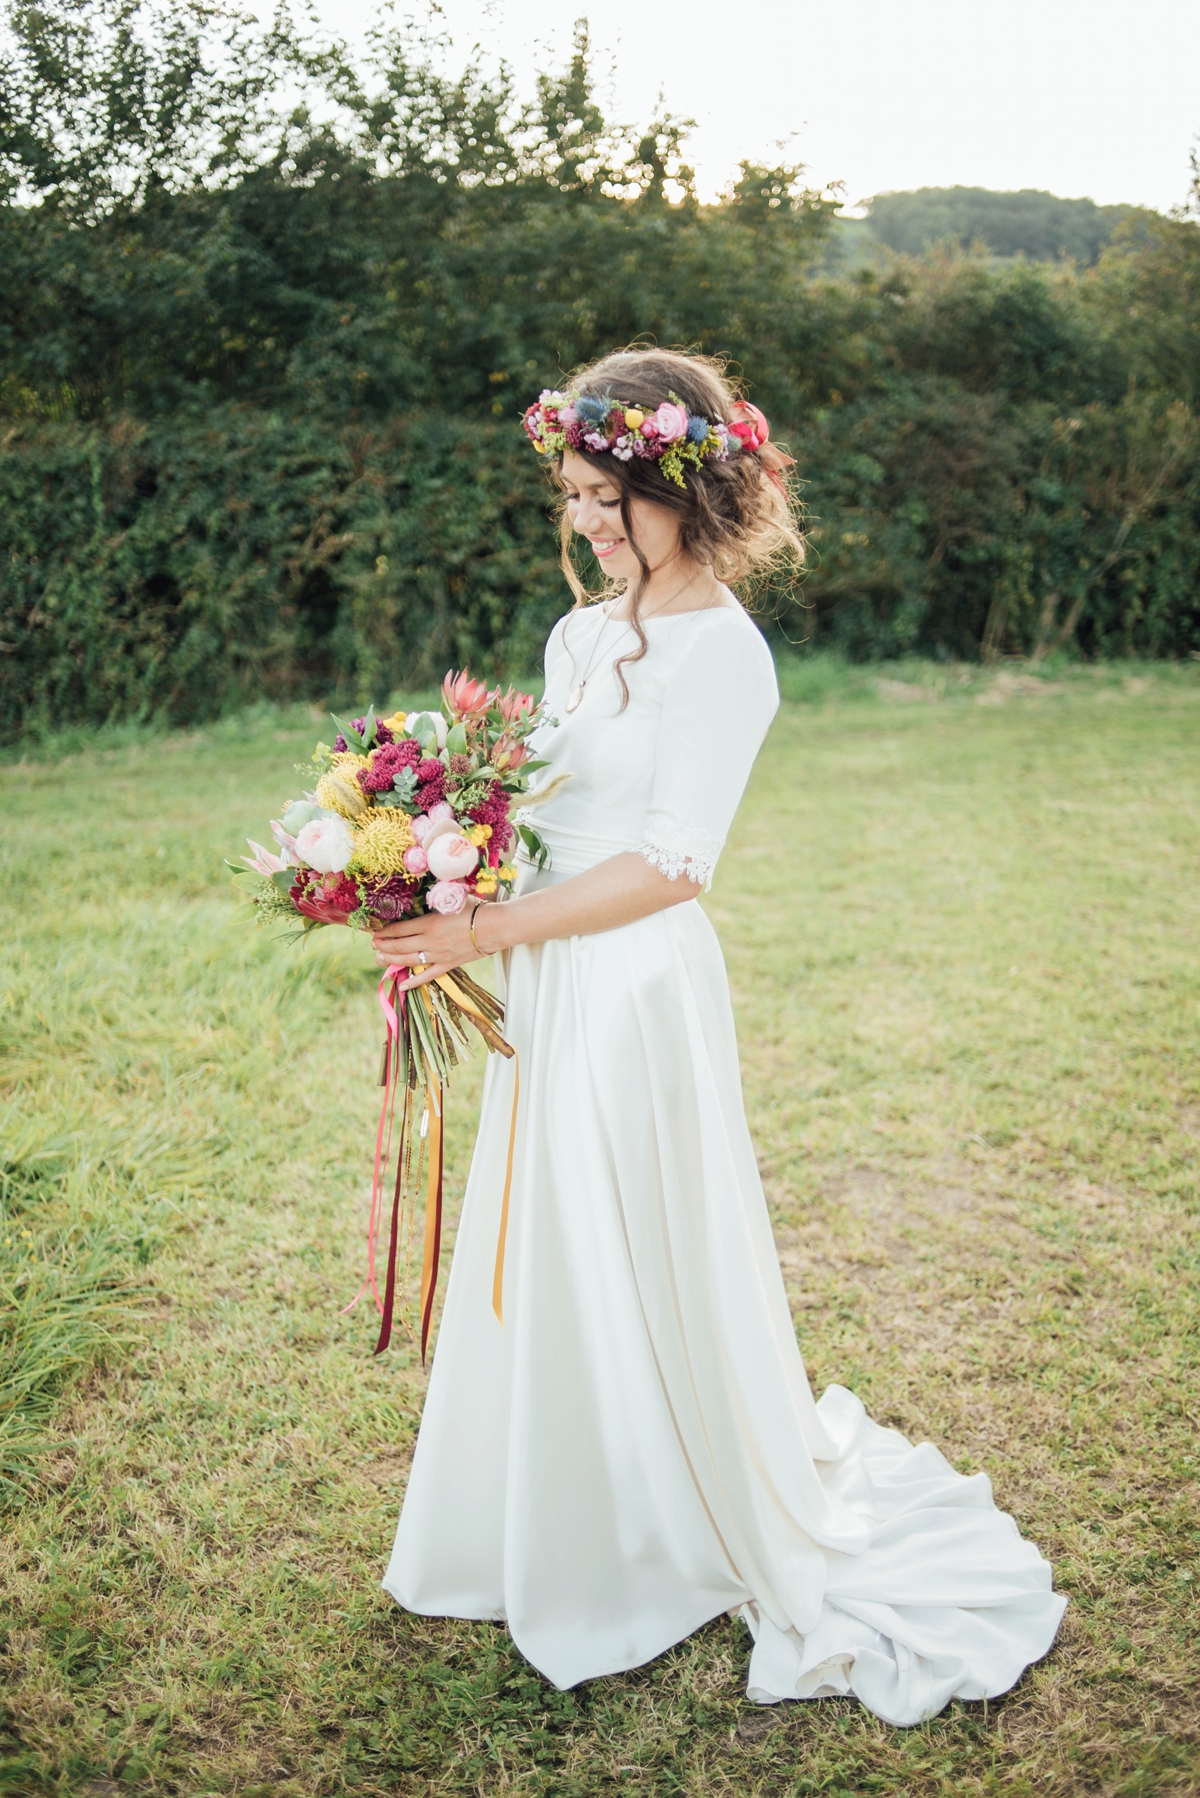 48 A handmade and natural outdoor wedding in Devon